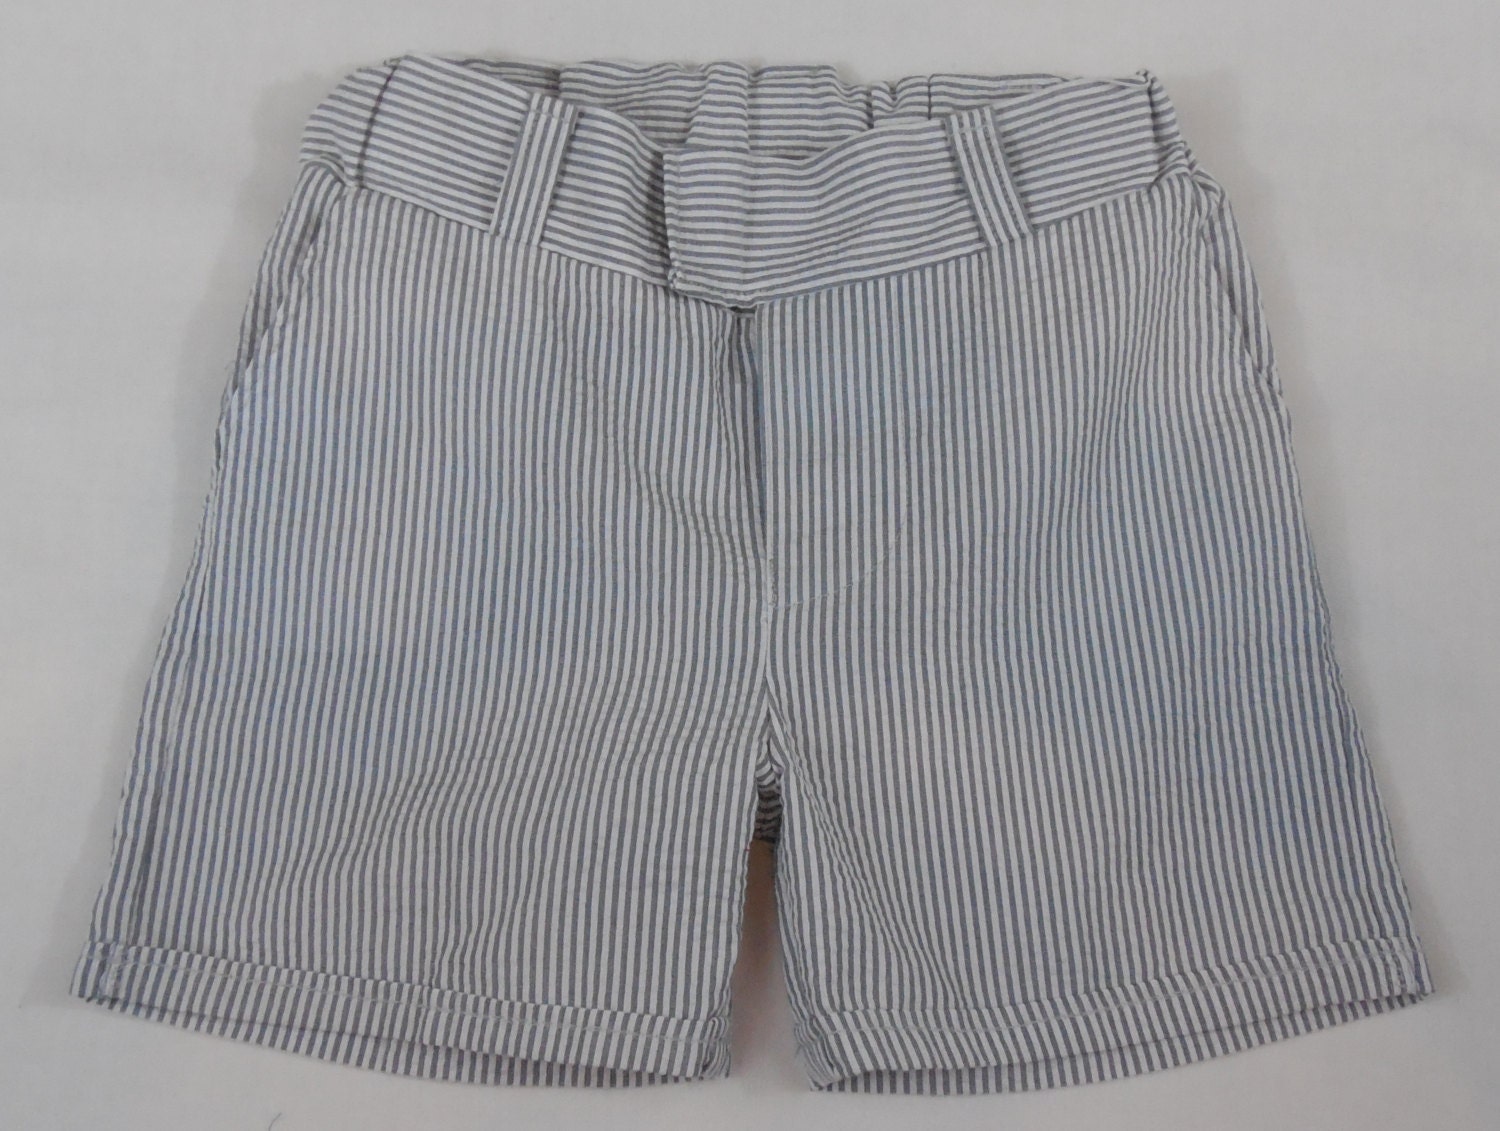 Gray and white or Navy and white stripe boys seersucker shorts